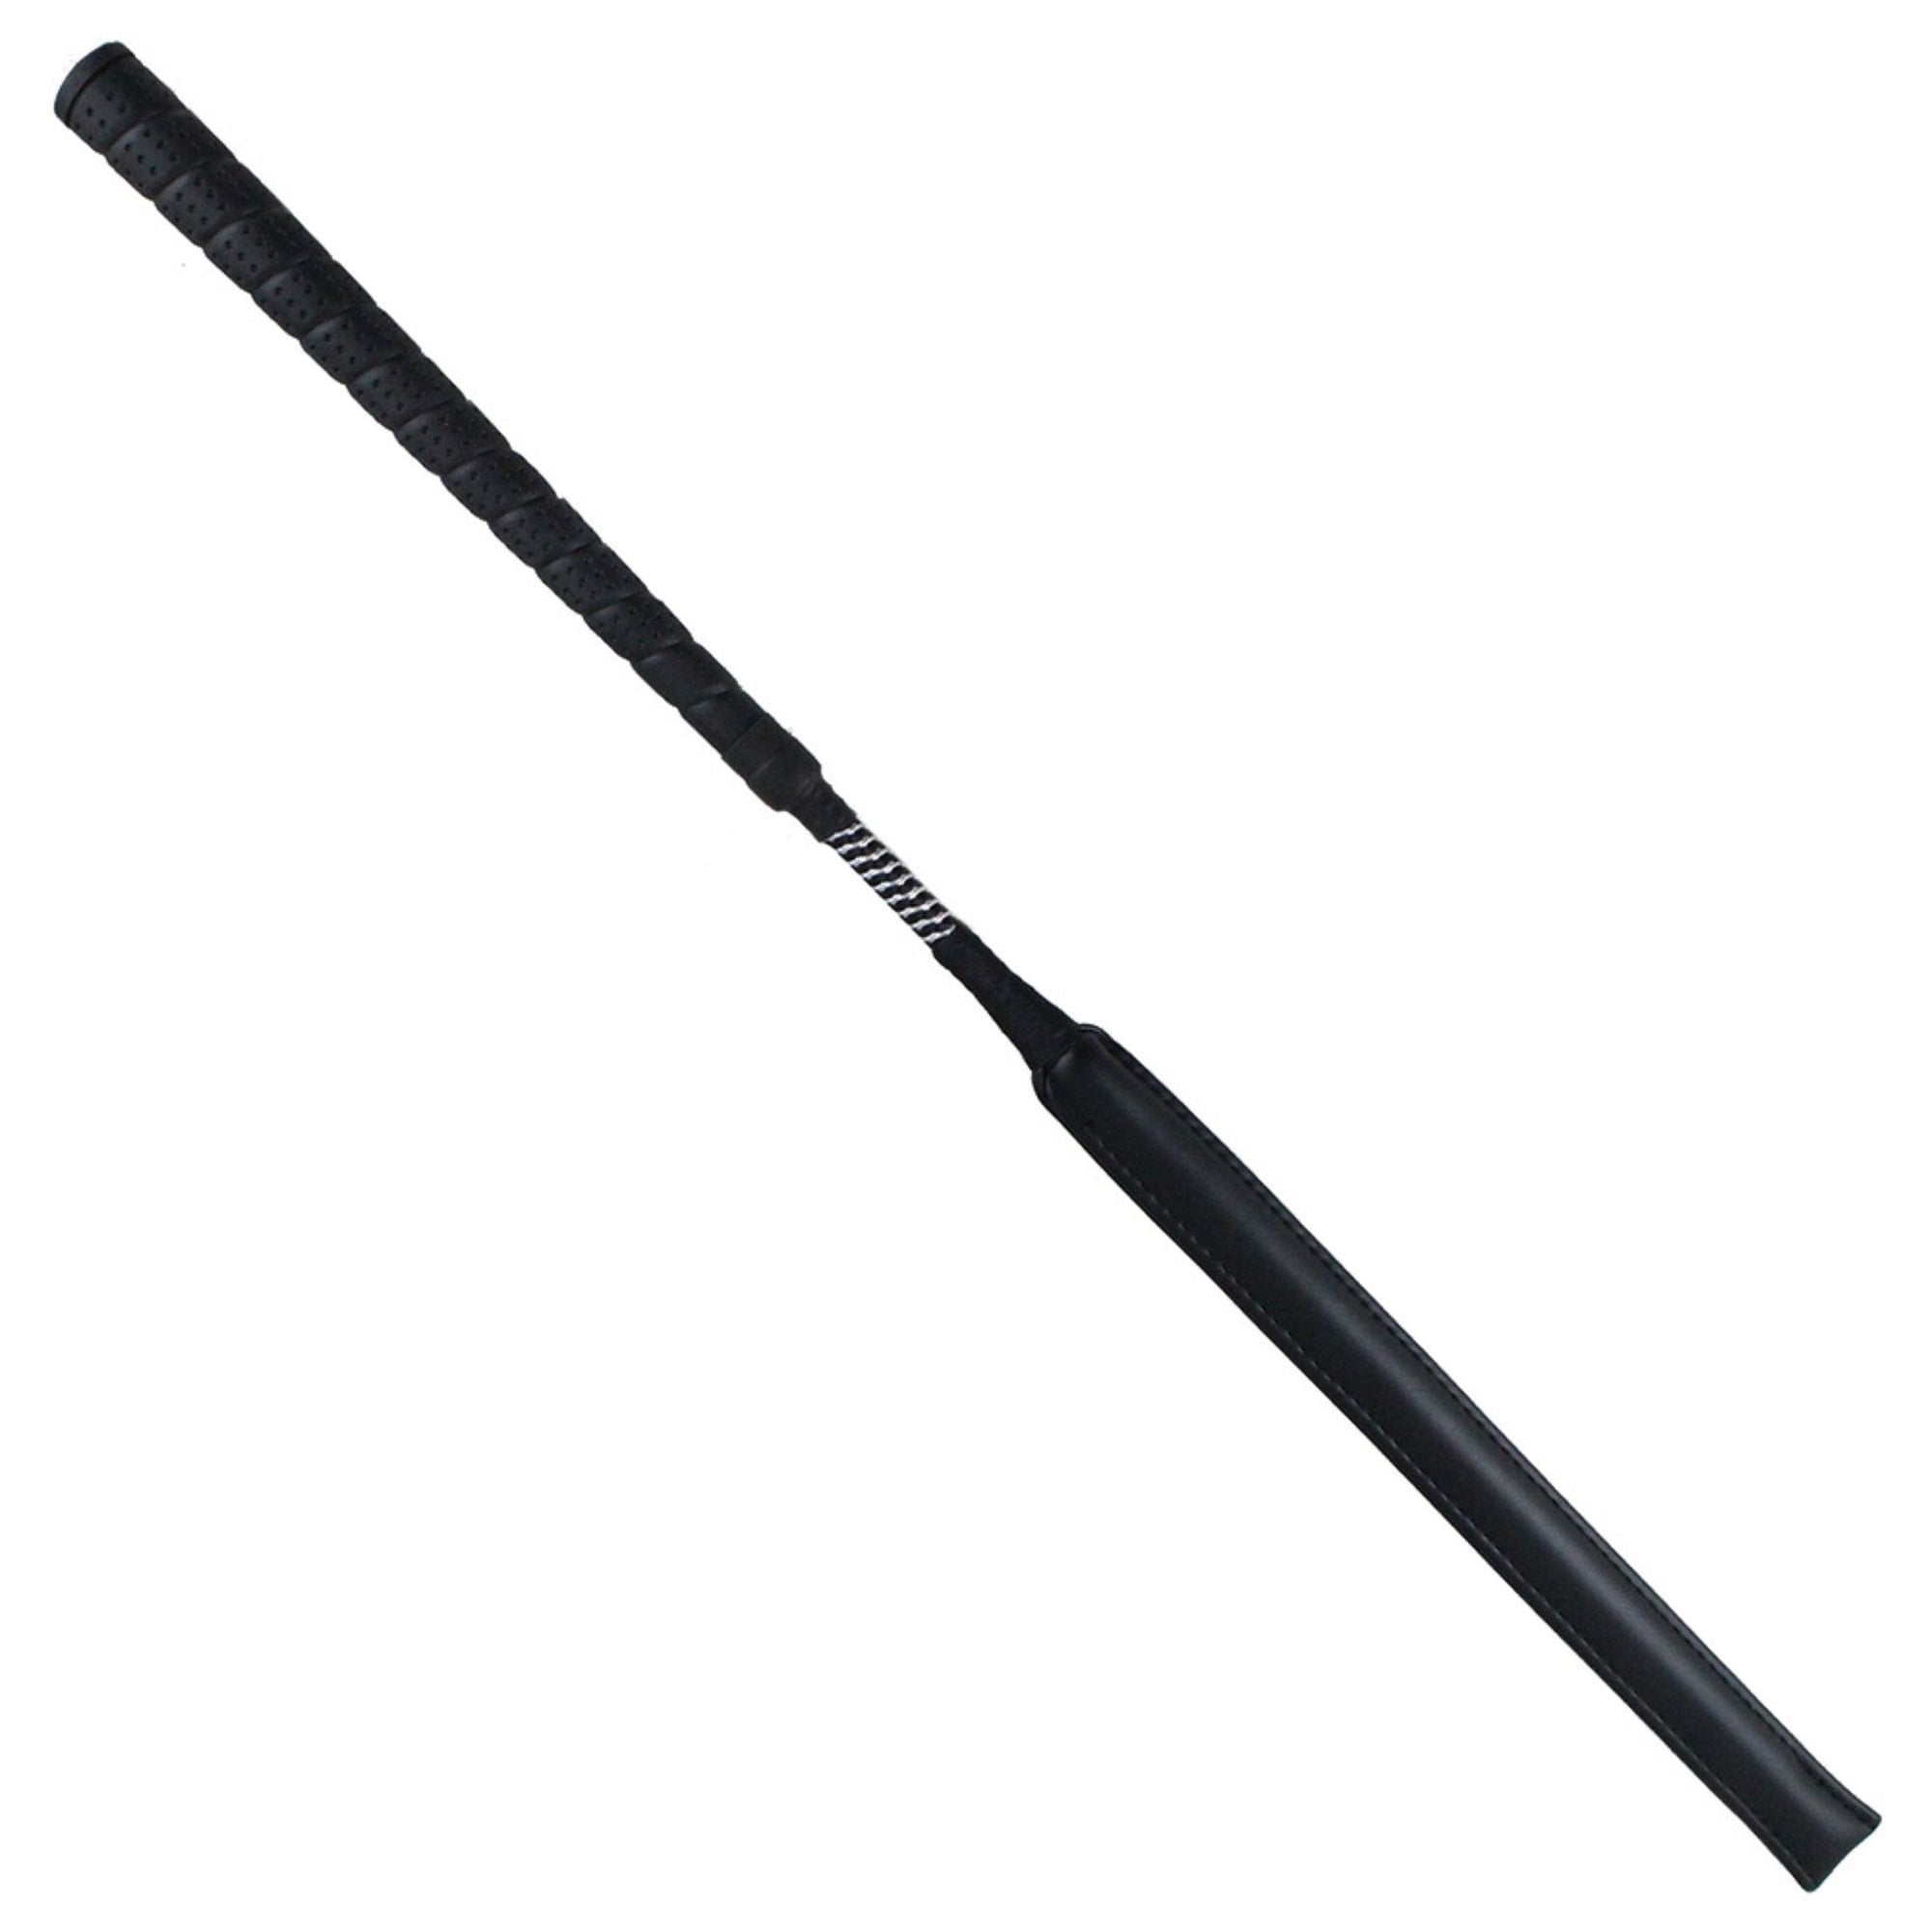 Black jump bat with soft padded bat end and a full grip handle.